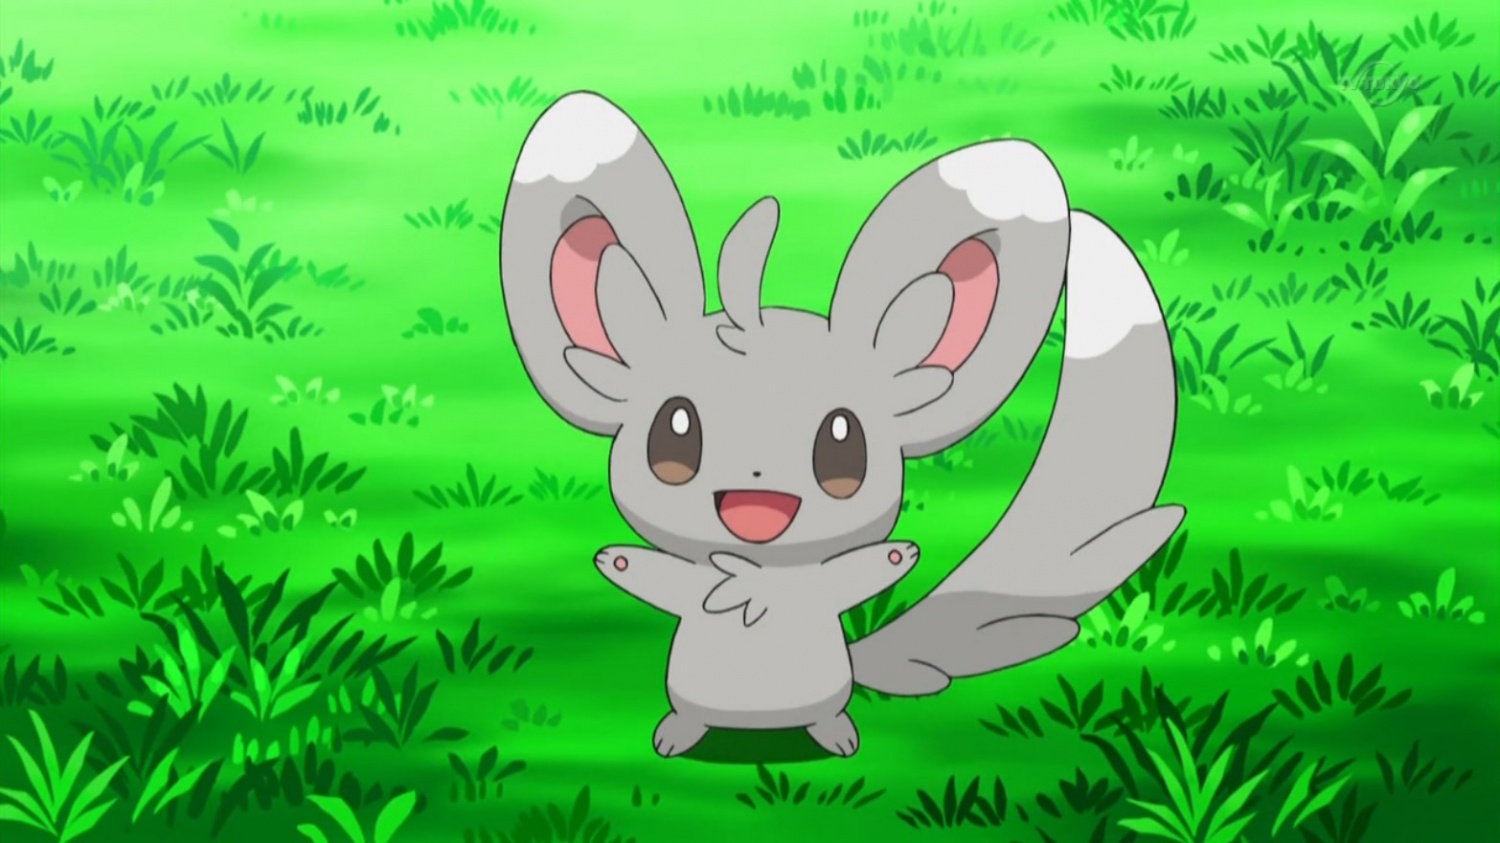 Pokemon GO Update: How To Catch Pokemon GO Minccino on Limited Field Research 